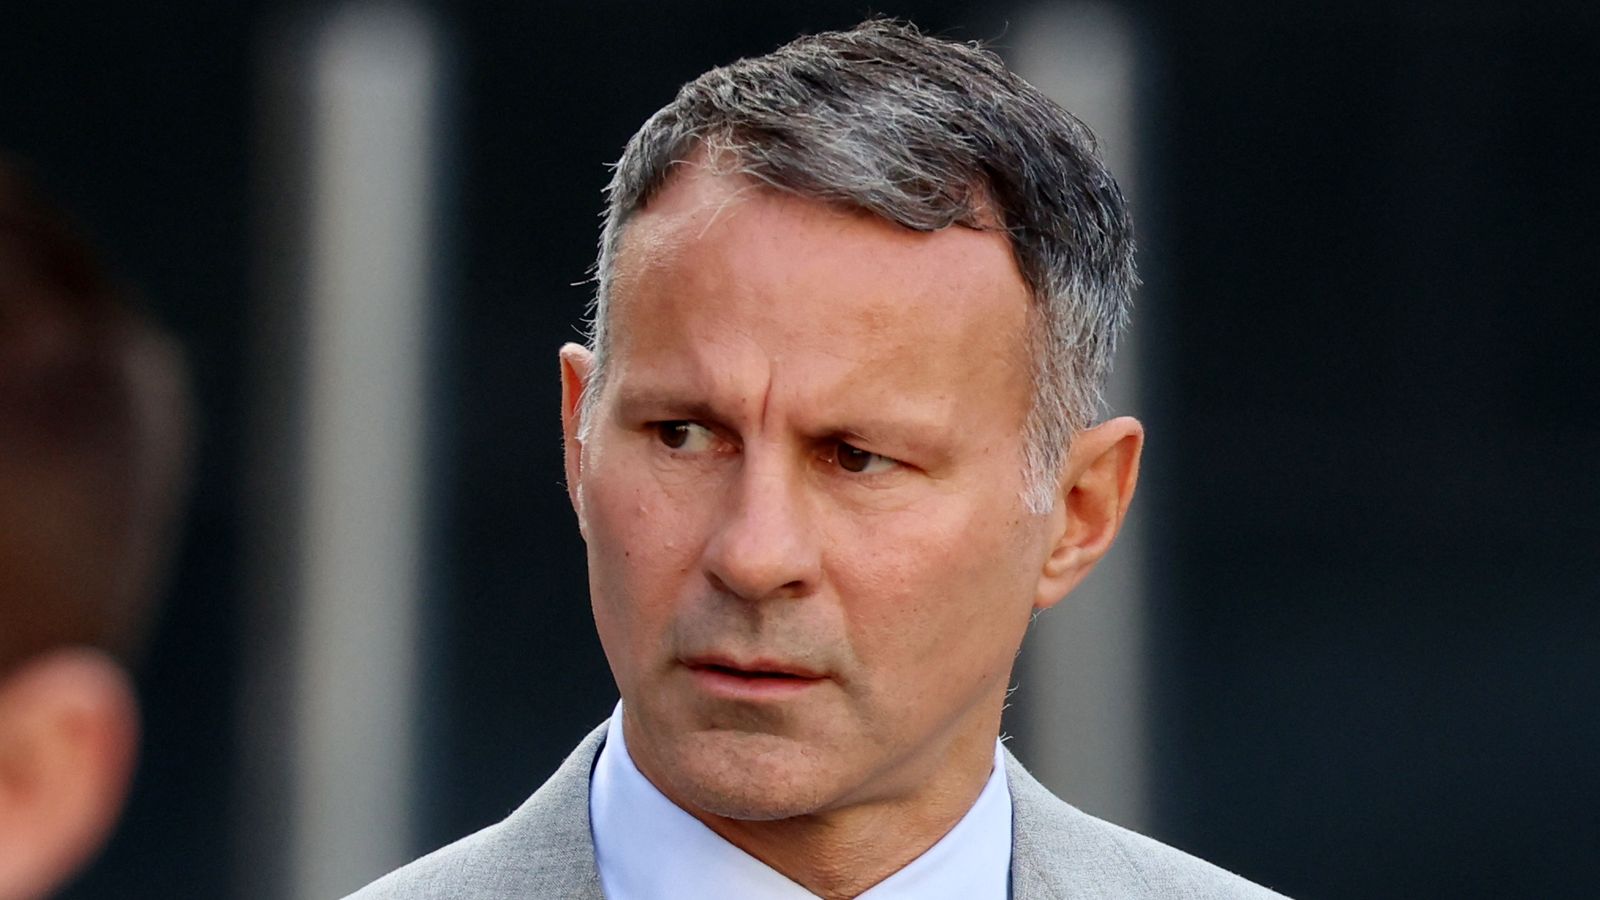 Ryan Giggs' retrial abandoned after domestic violence charges withdrawn